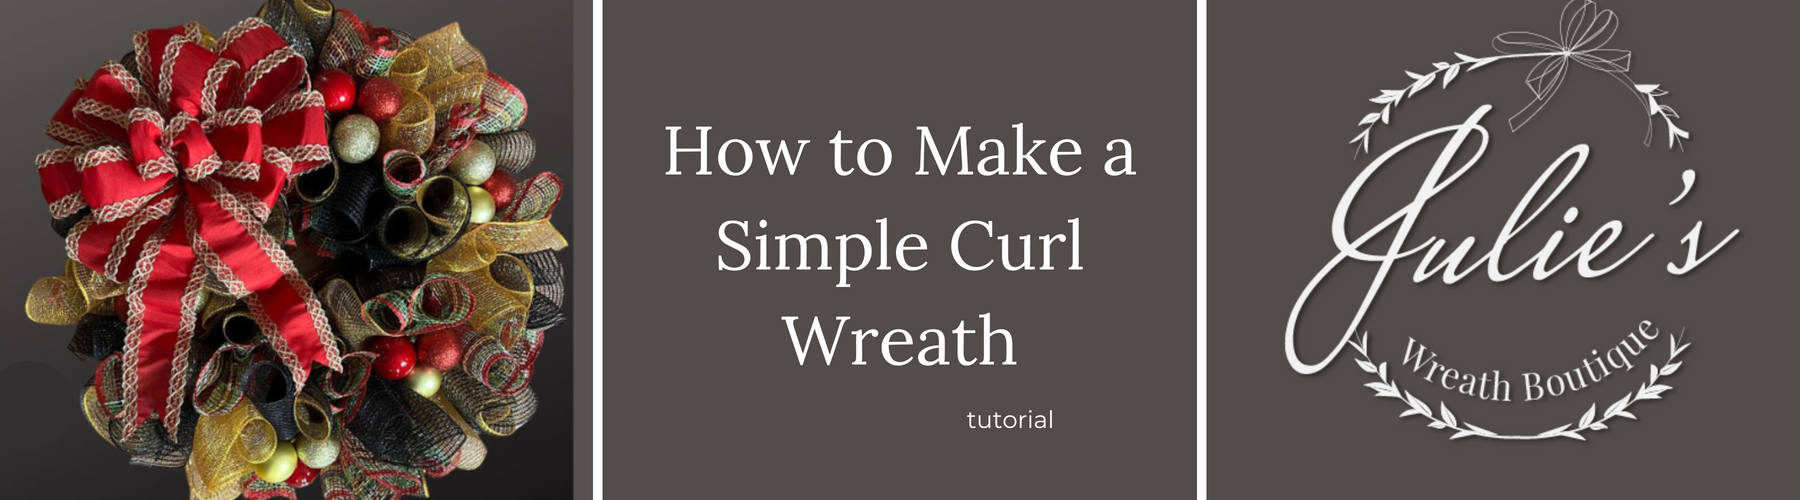 how to make a simple curl wreath with deco mesh